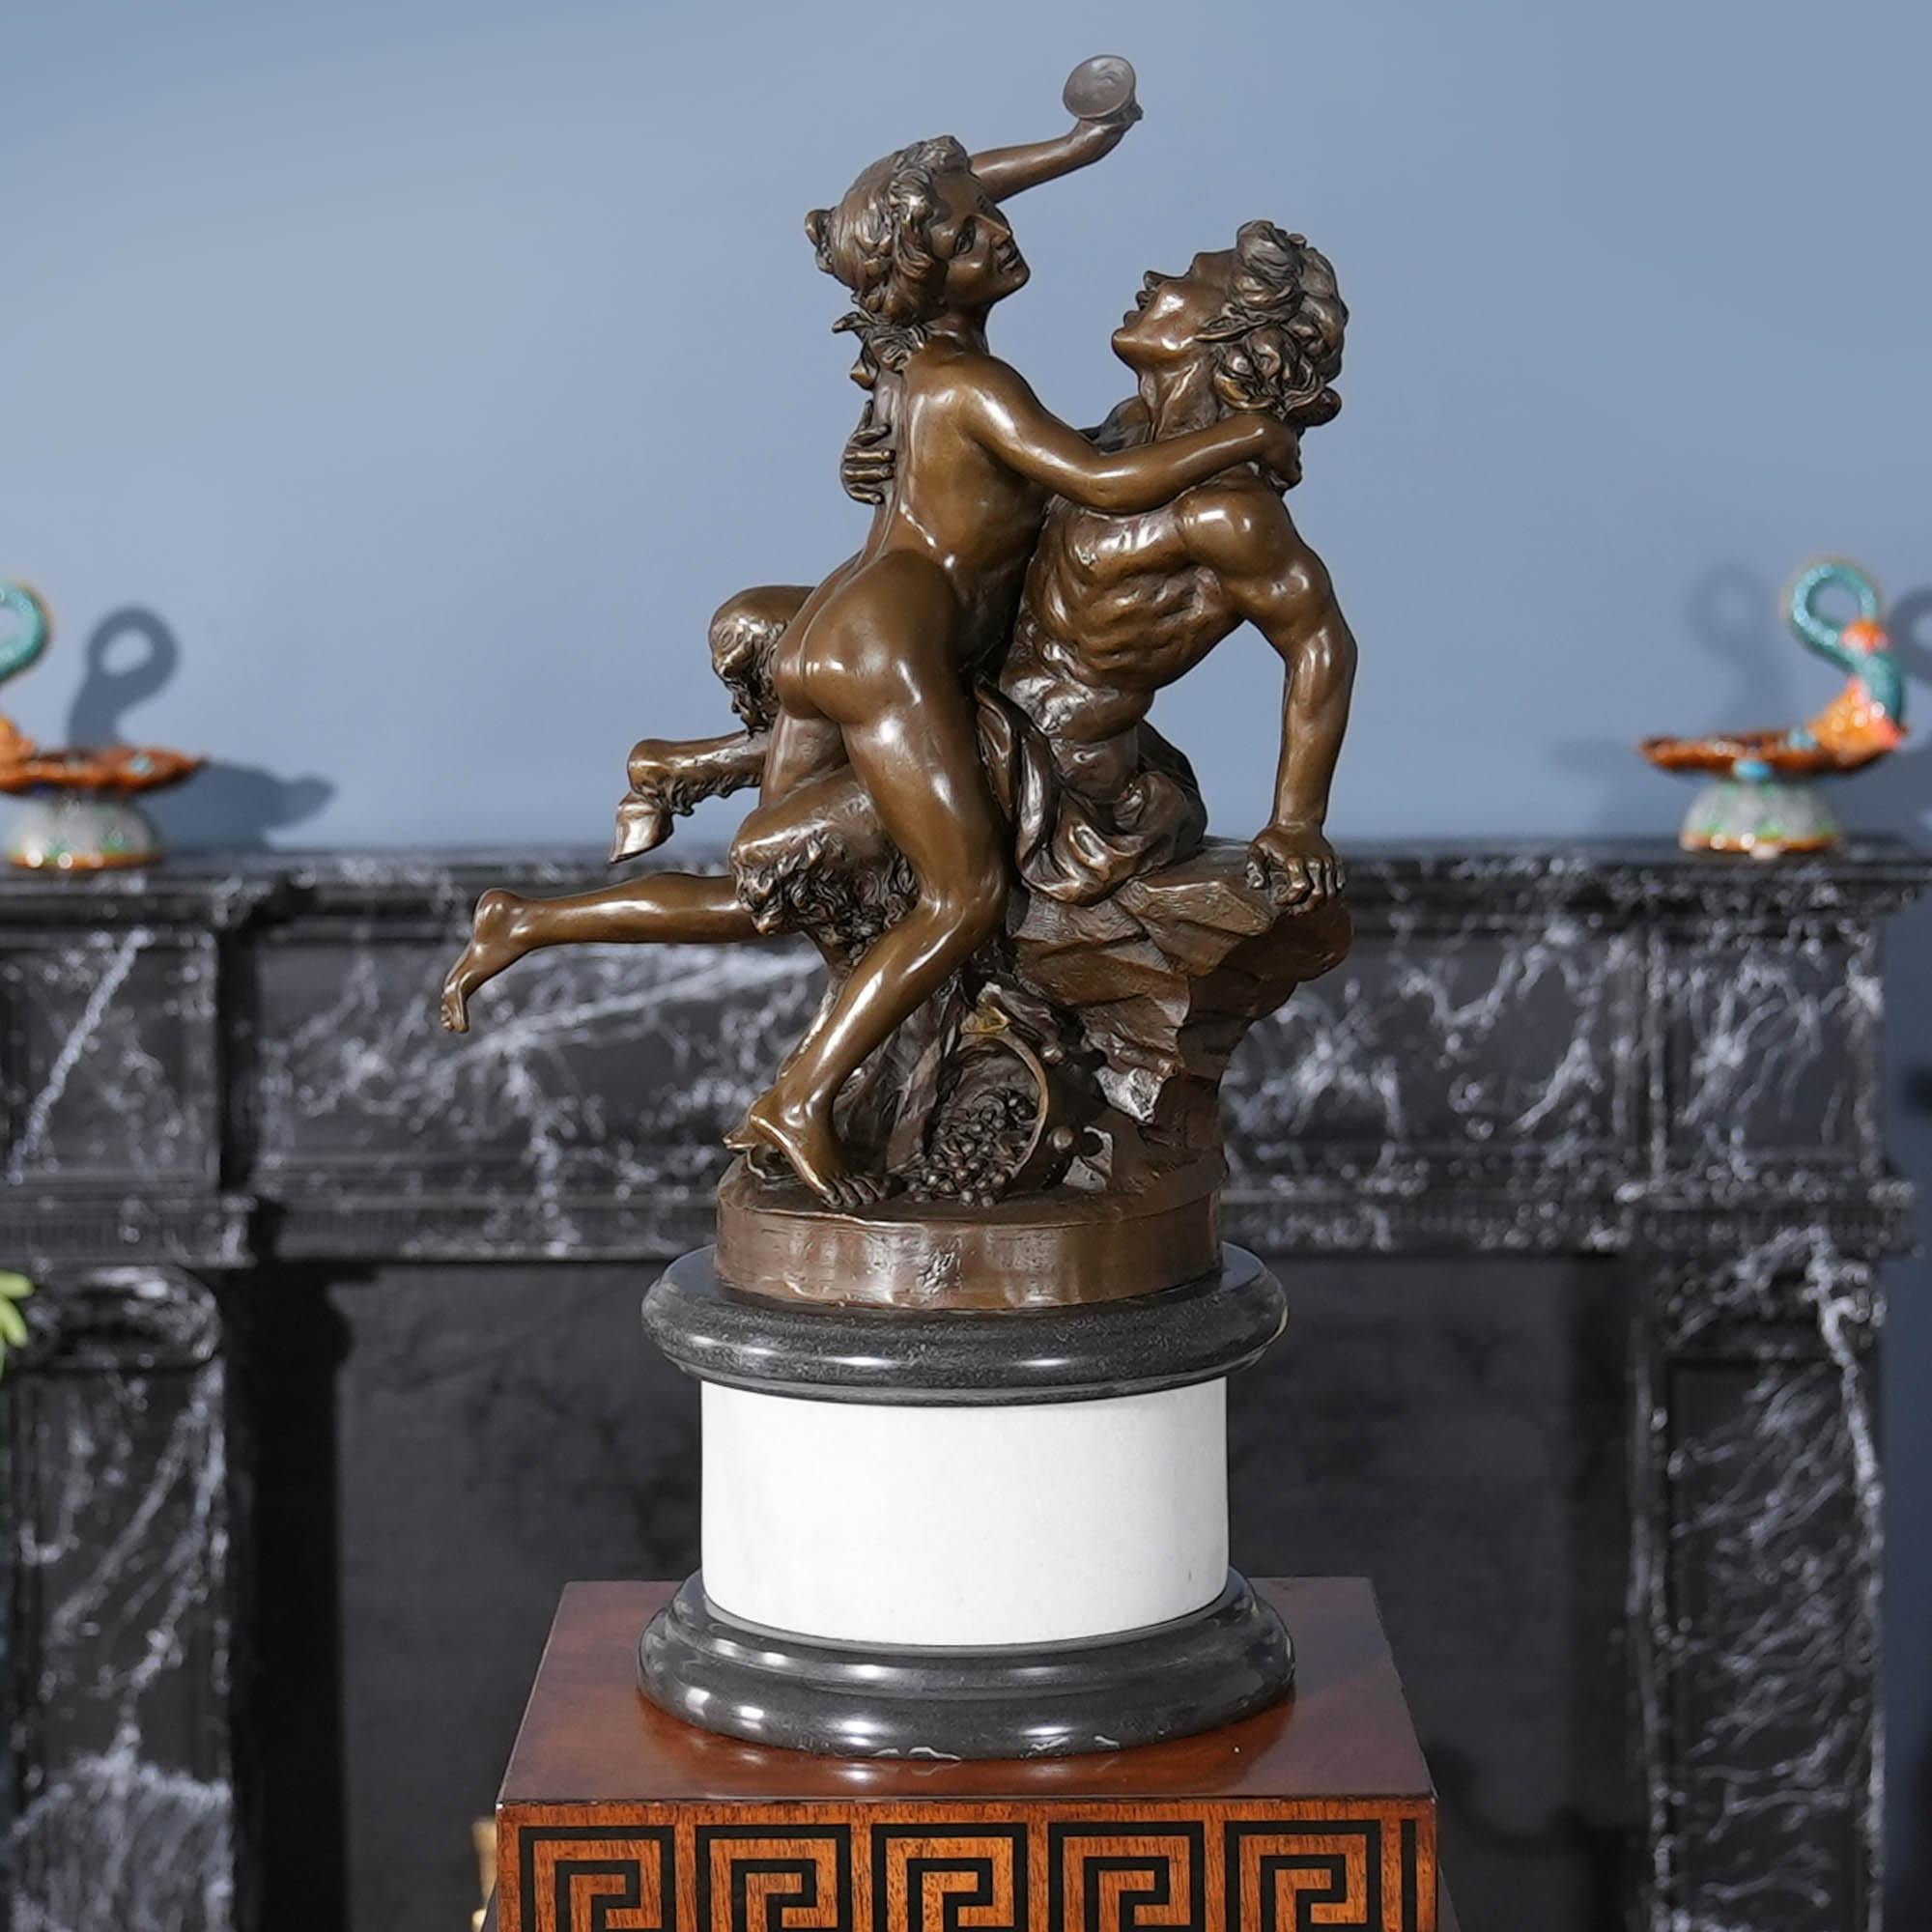 Beautiful even when standing still the Bronze Bacchus with Woman on Marble Base is a striking addition to any setting. Using traditional lost wax casting methods the Bronze Bacchus with Woman statue has hand chaised details added to give a high